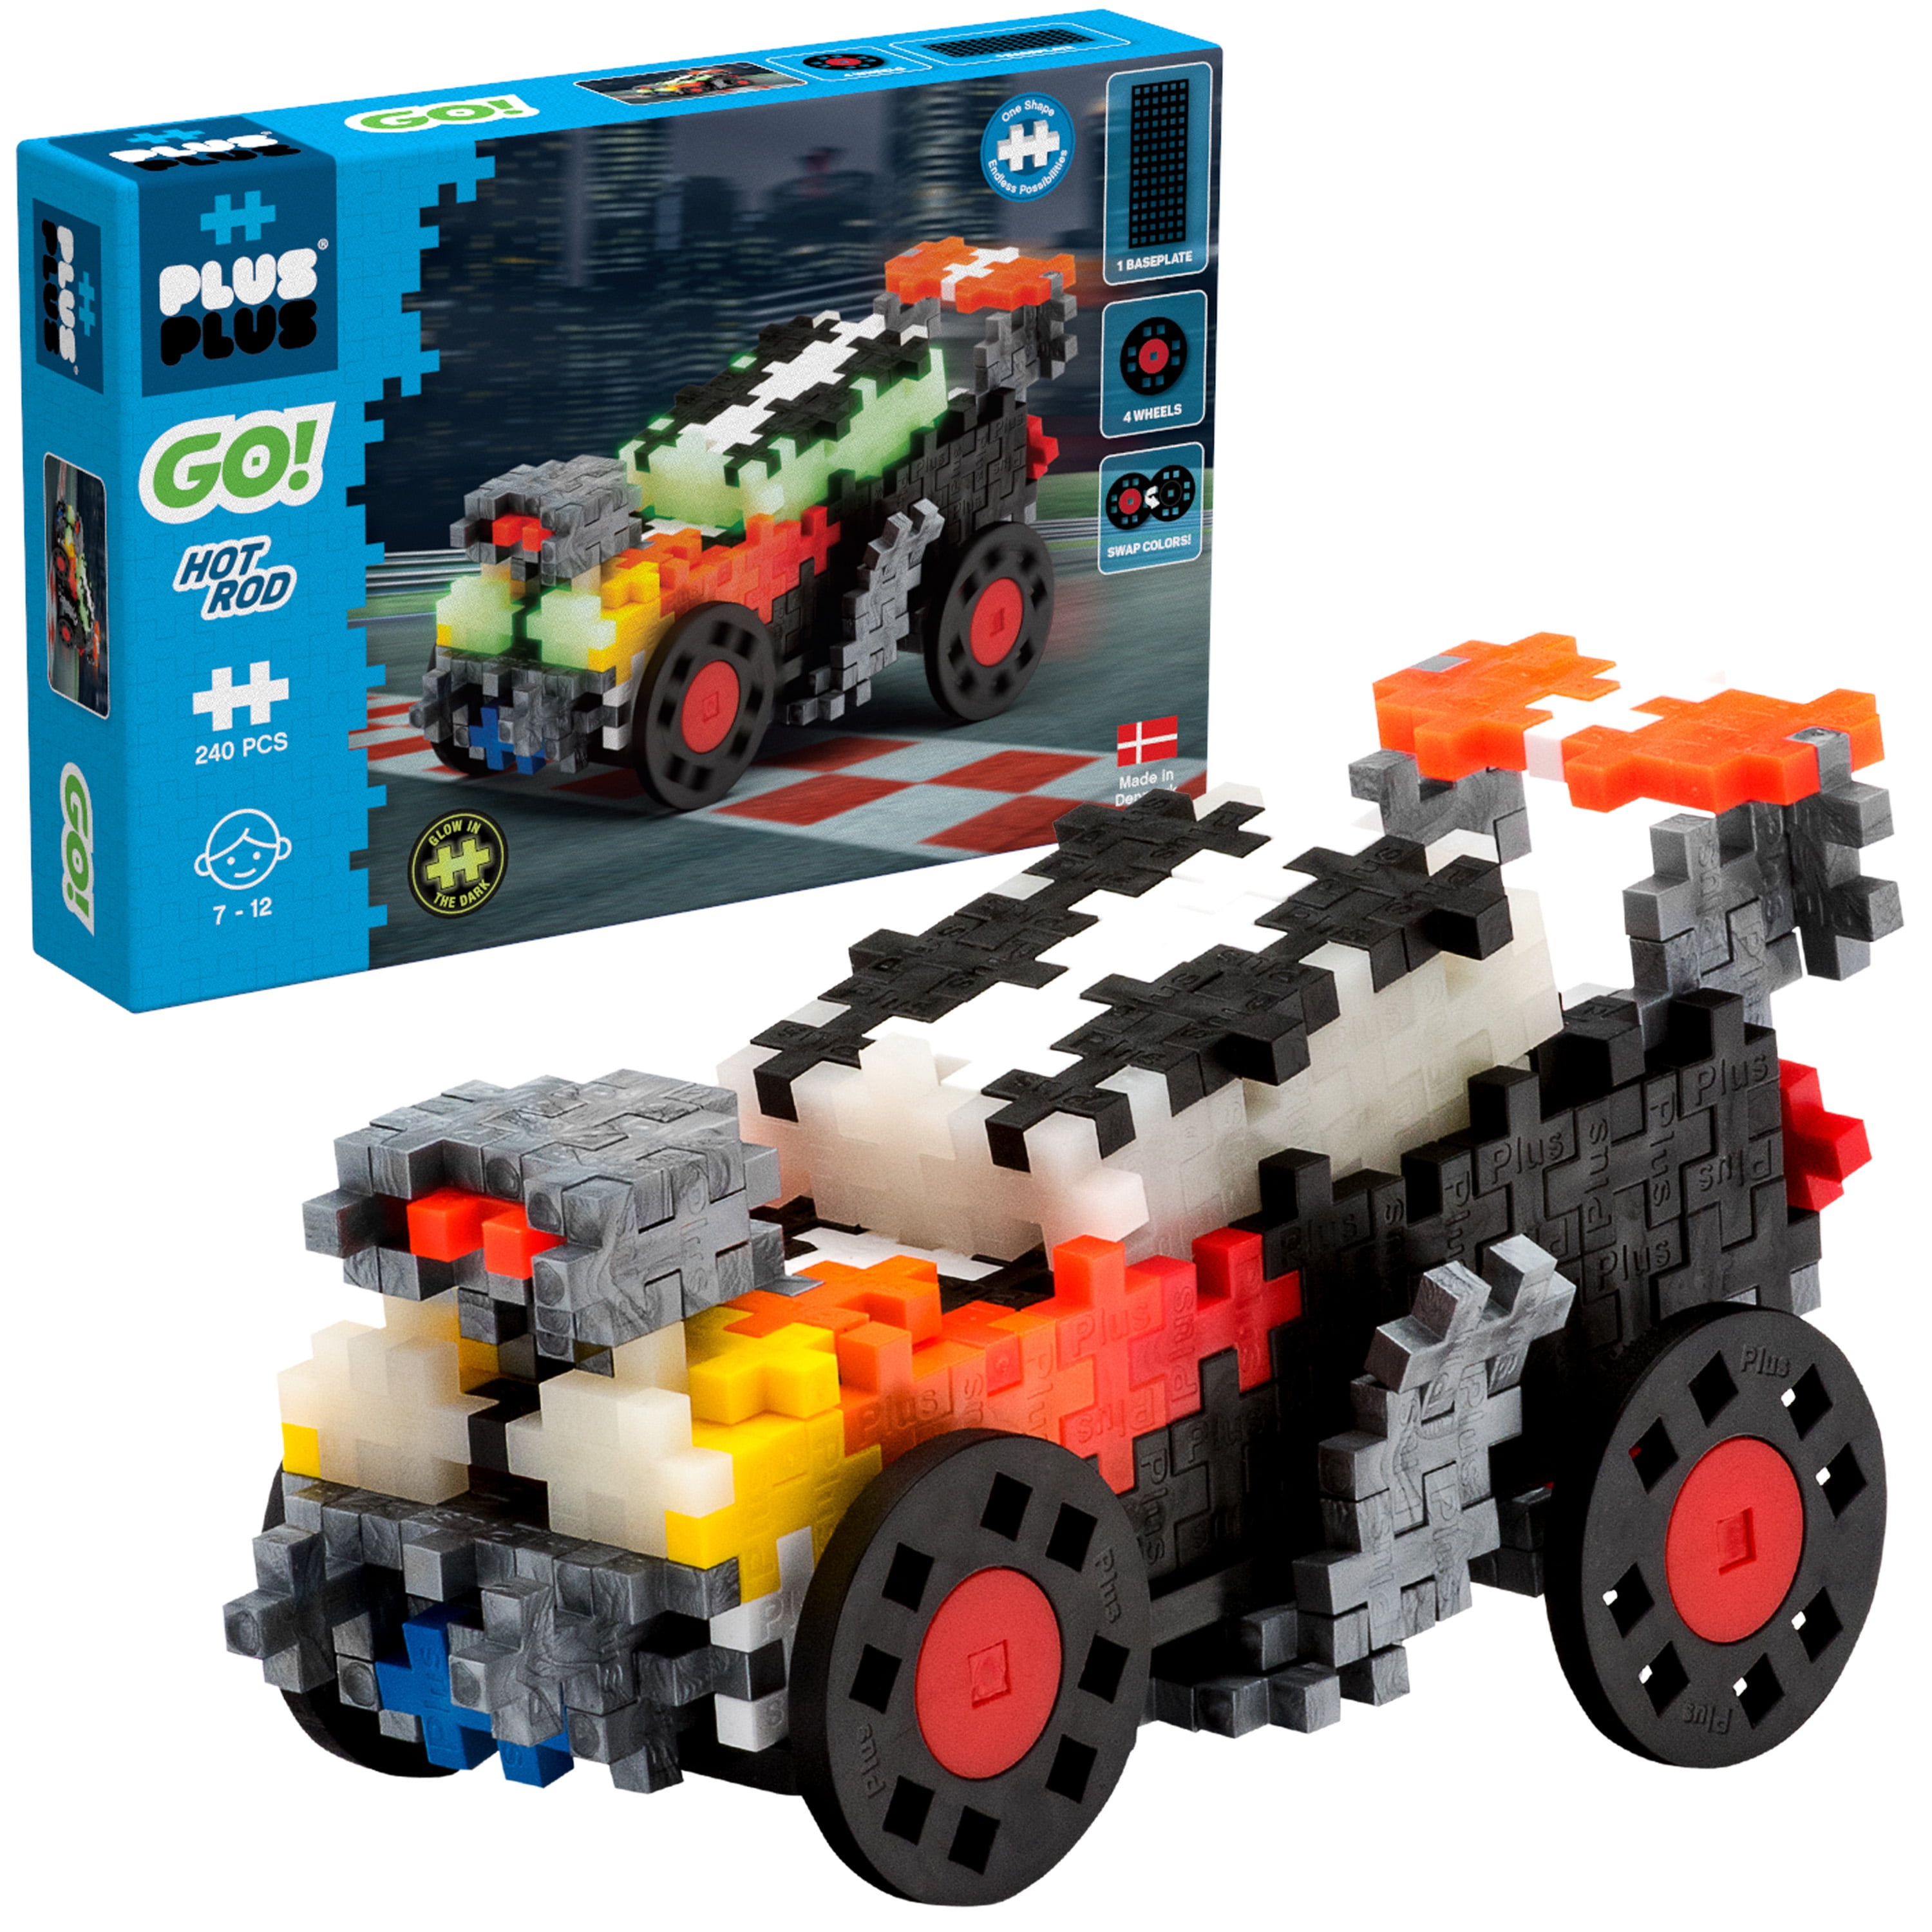 Hot Rod design intellectually stimulating playing bricks toy for Kid New AAV3 